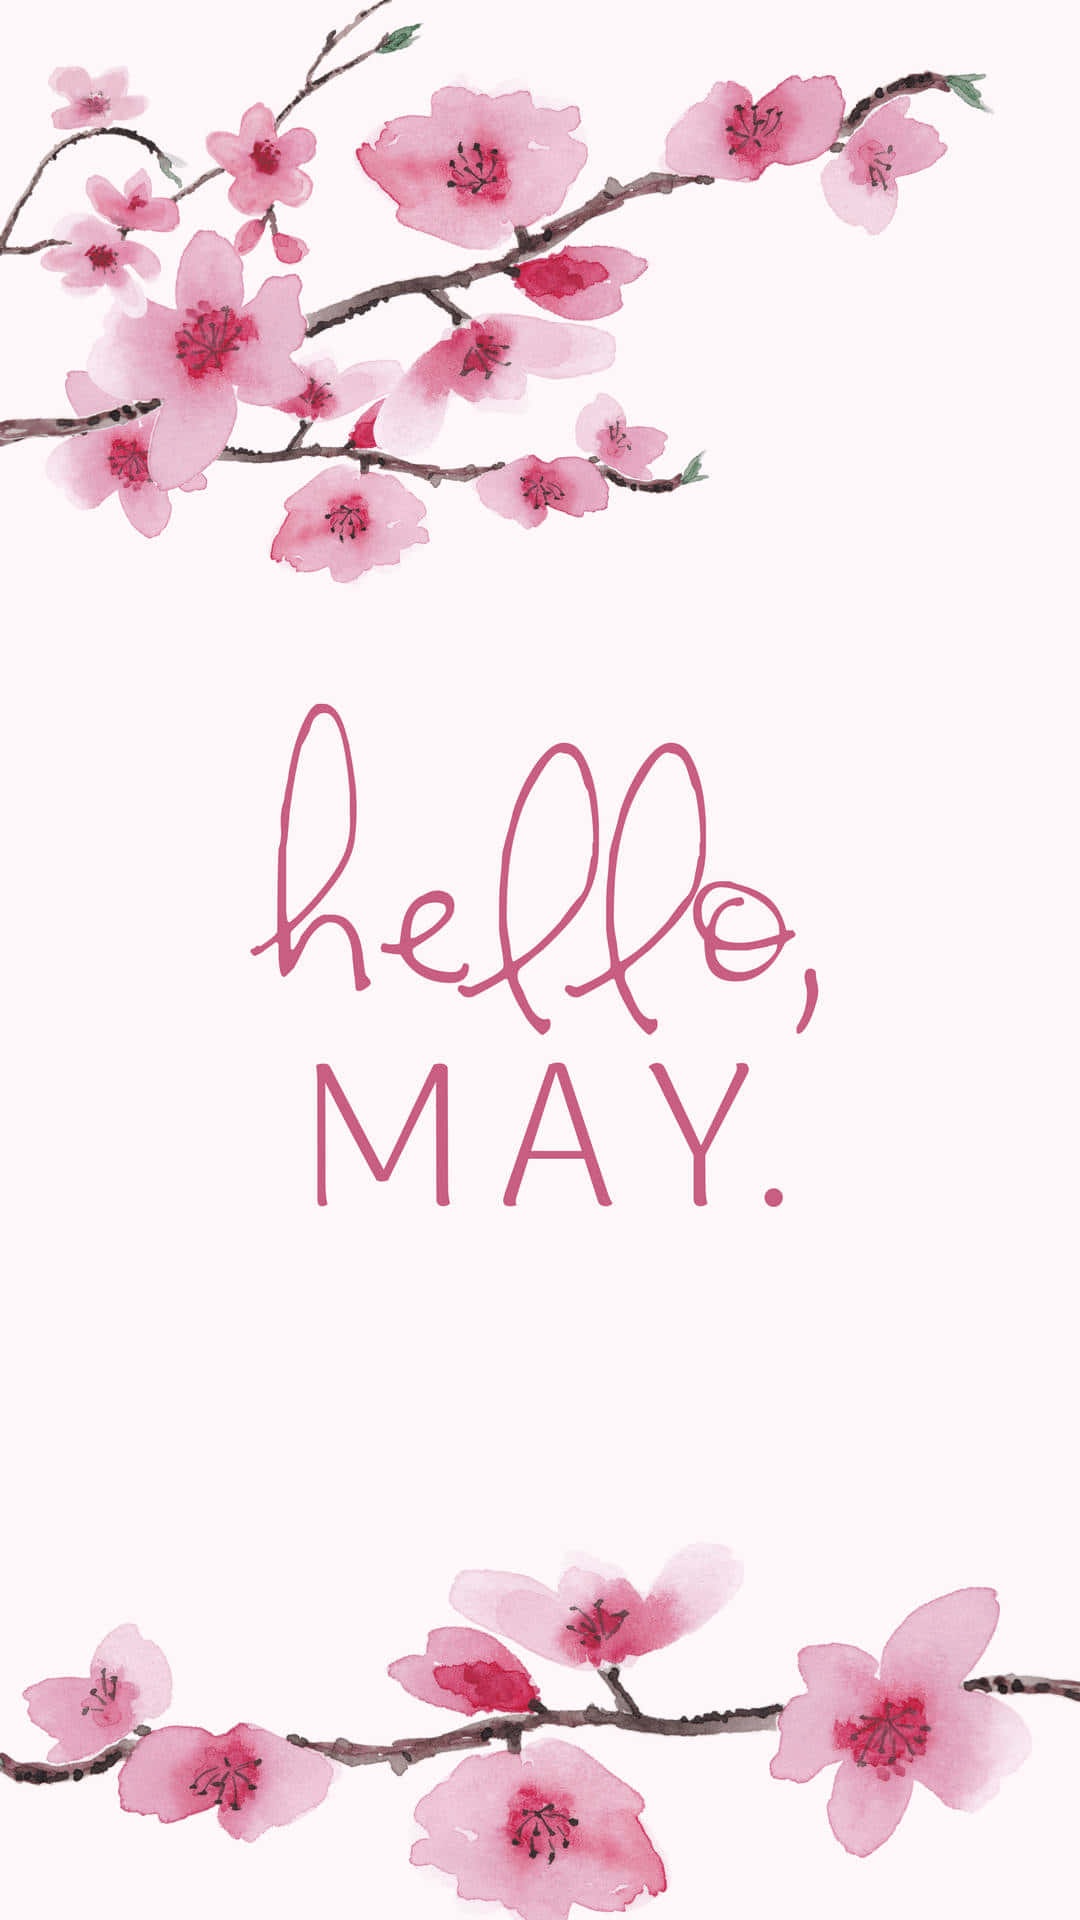 Celebrate May in your own unique way